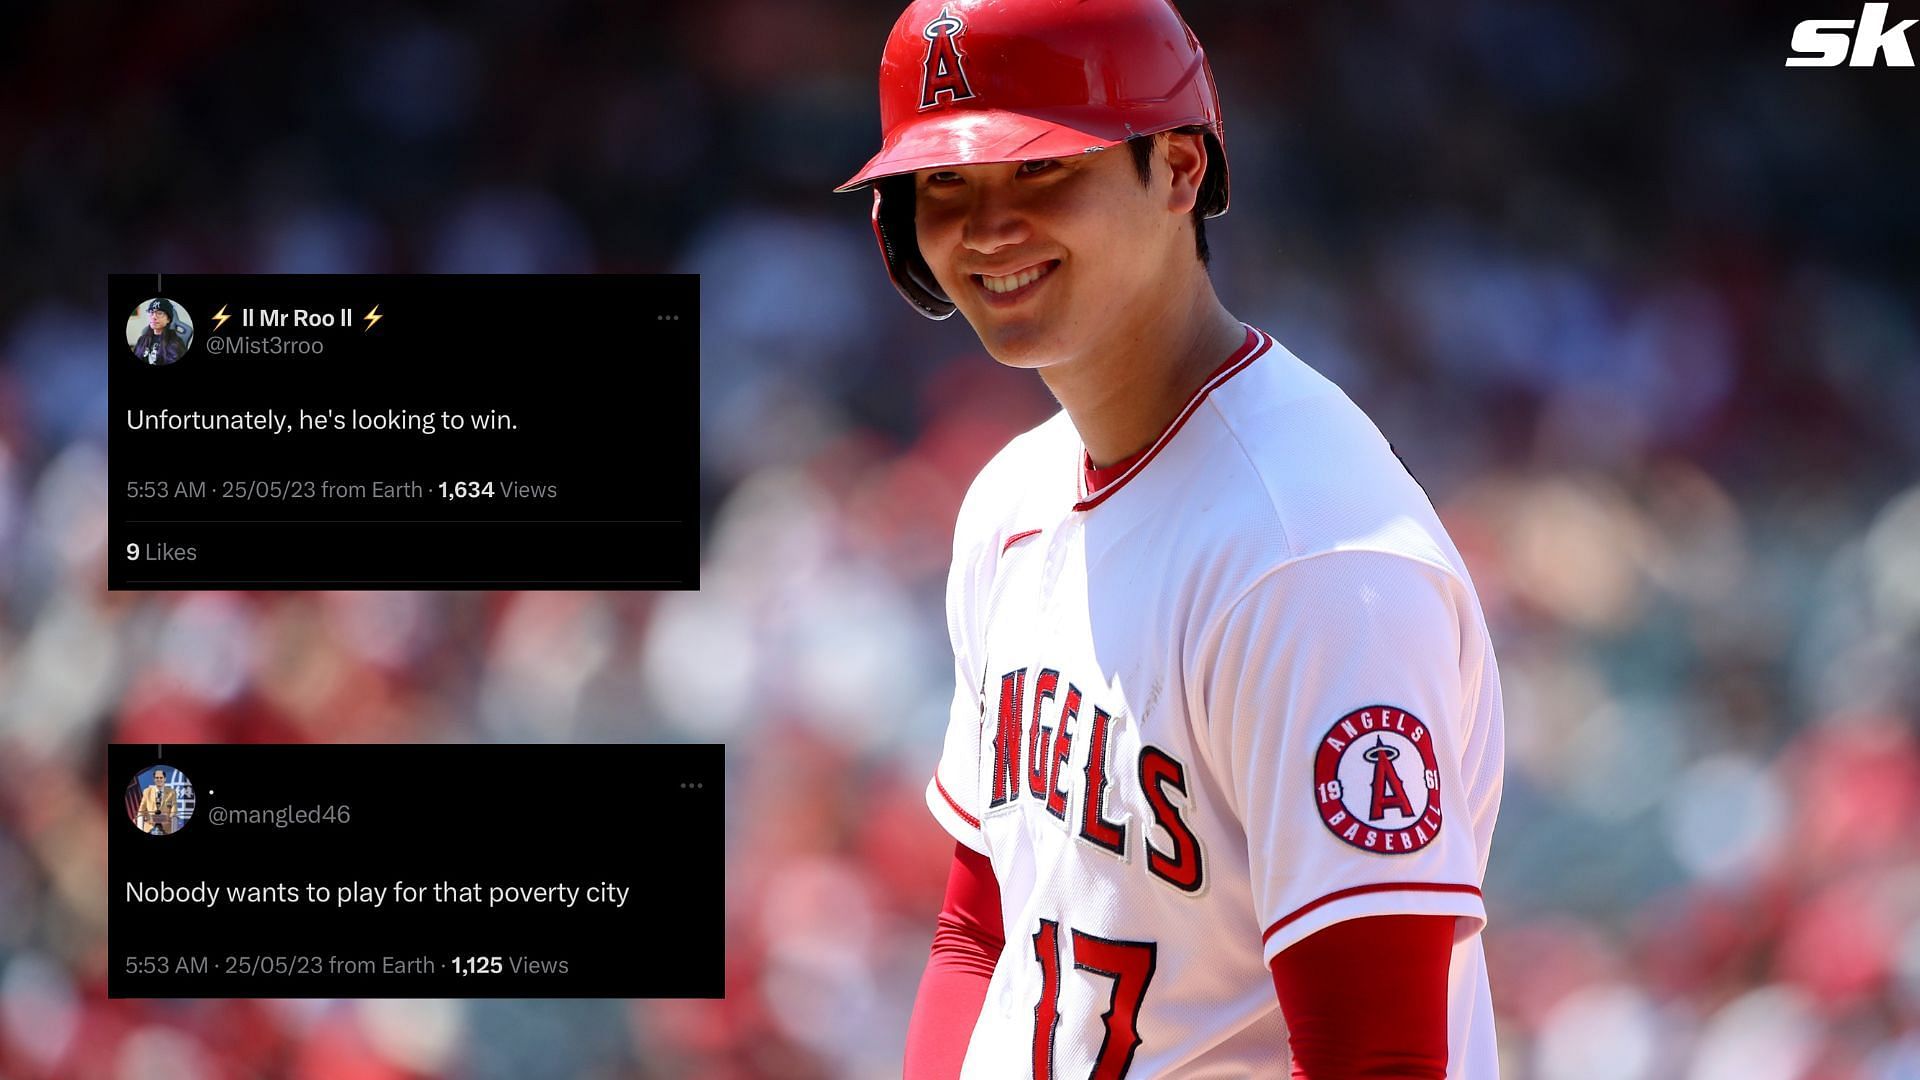 Shohei Ohtani reacts after a hit during a game on the MLB